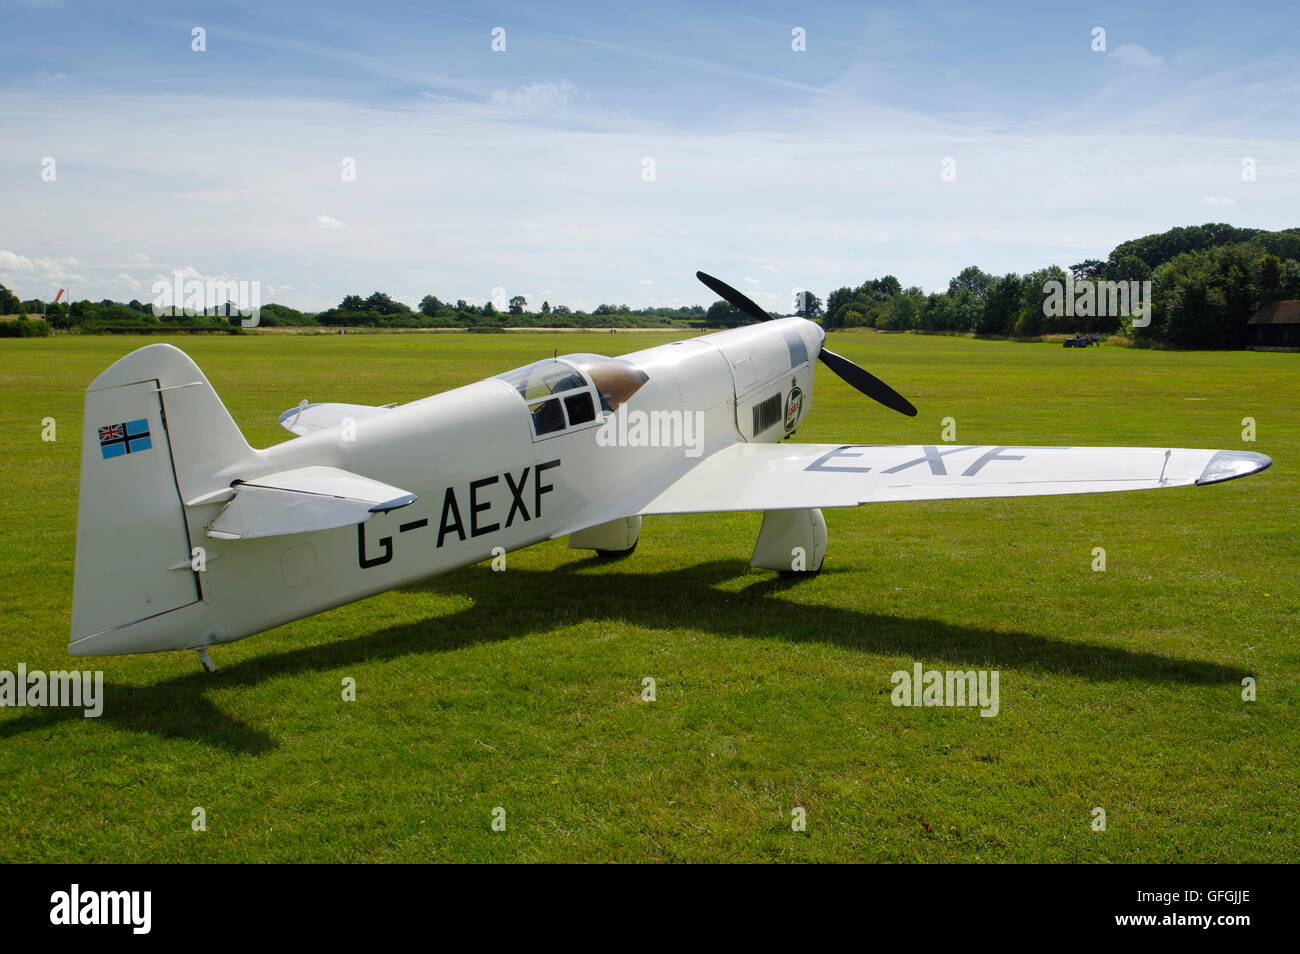 Percival Mew Gull G-AEXF at Old Warden. Stock Photo